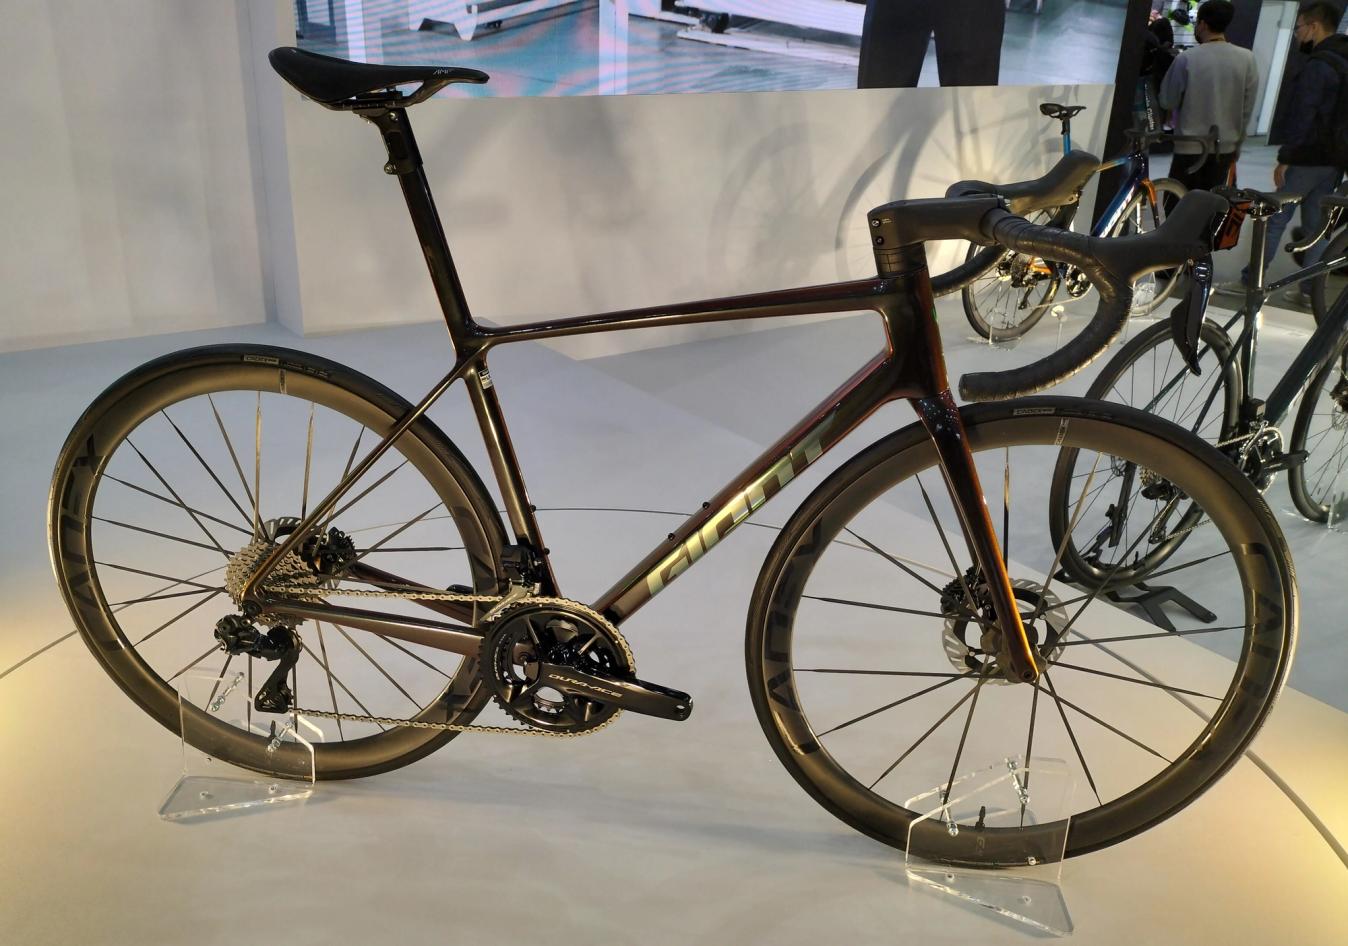 The new range of Giant TCR bikes caught plenty of attention